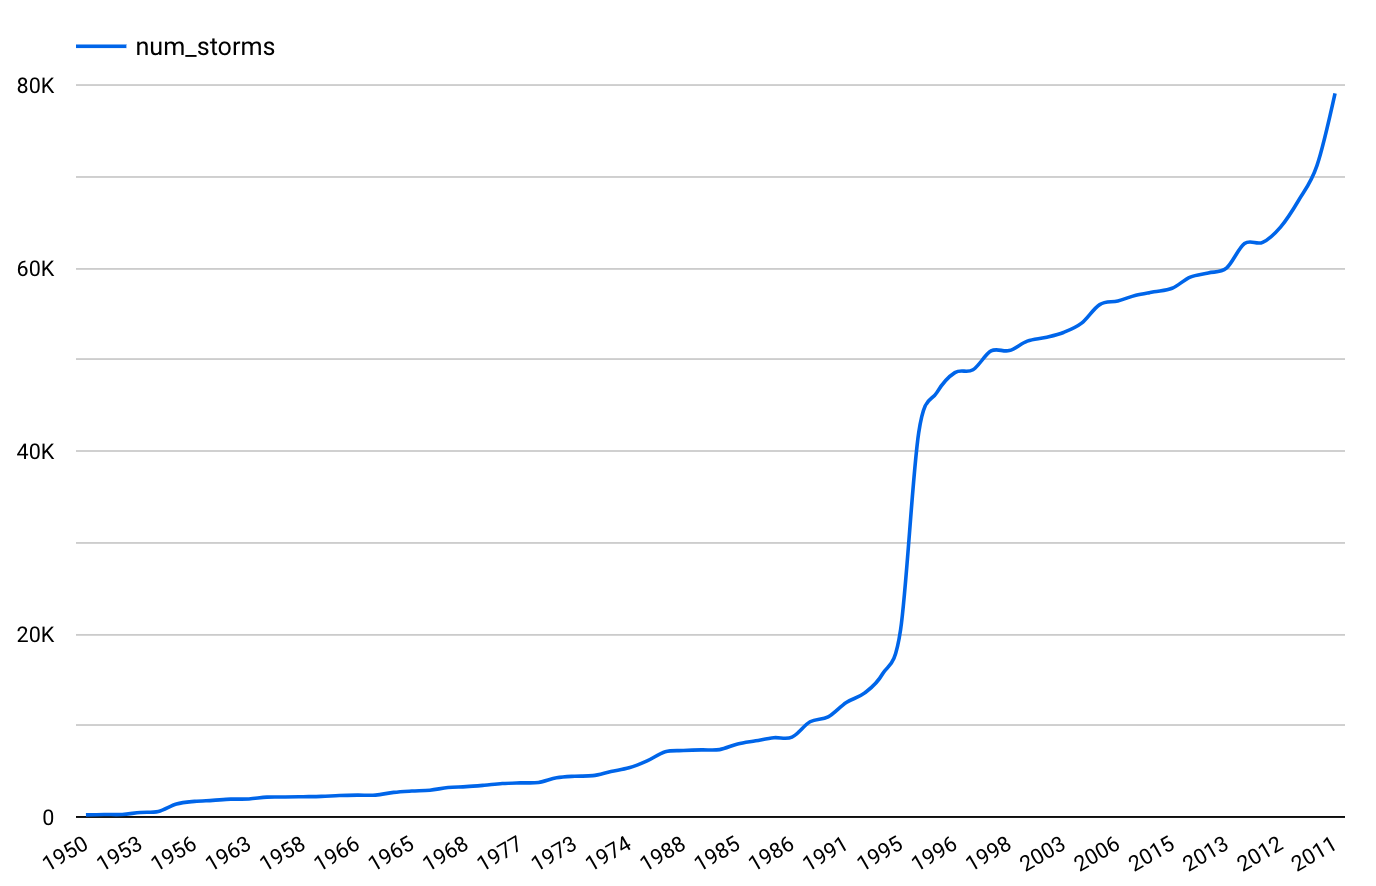   Number of severe storms reported in a year  as recorded by NOAA from 1950 to 2011